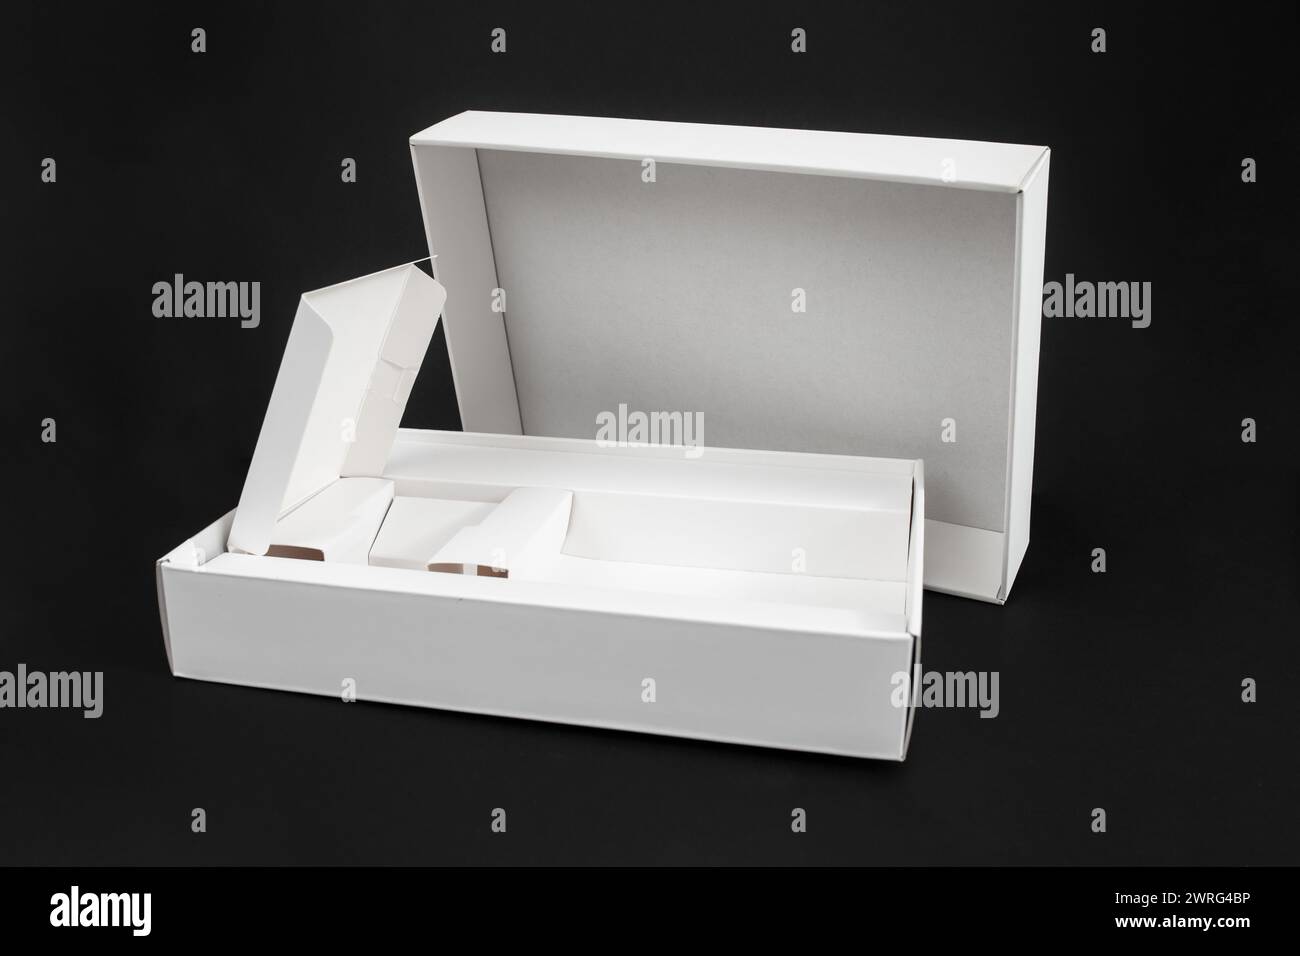 Empty smartphone or tablet box, white cardboard packaging isolated on black background Stock Photo